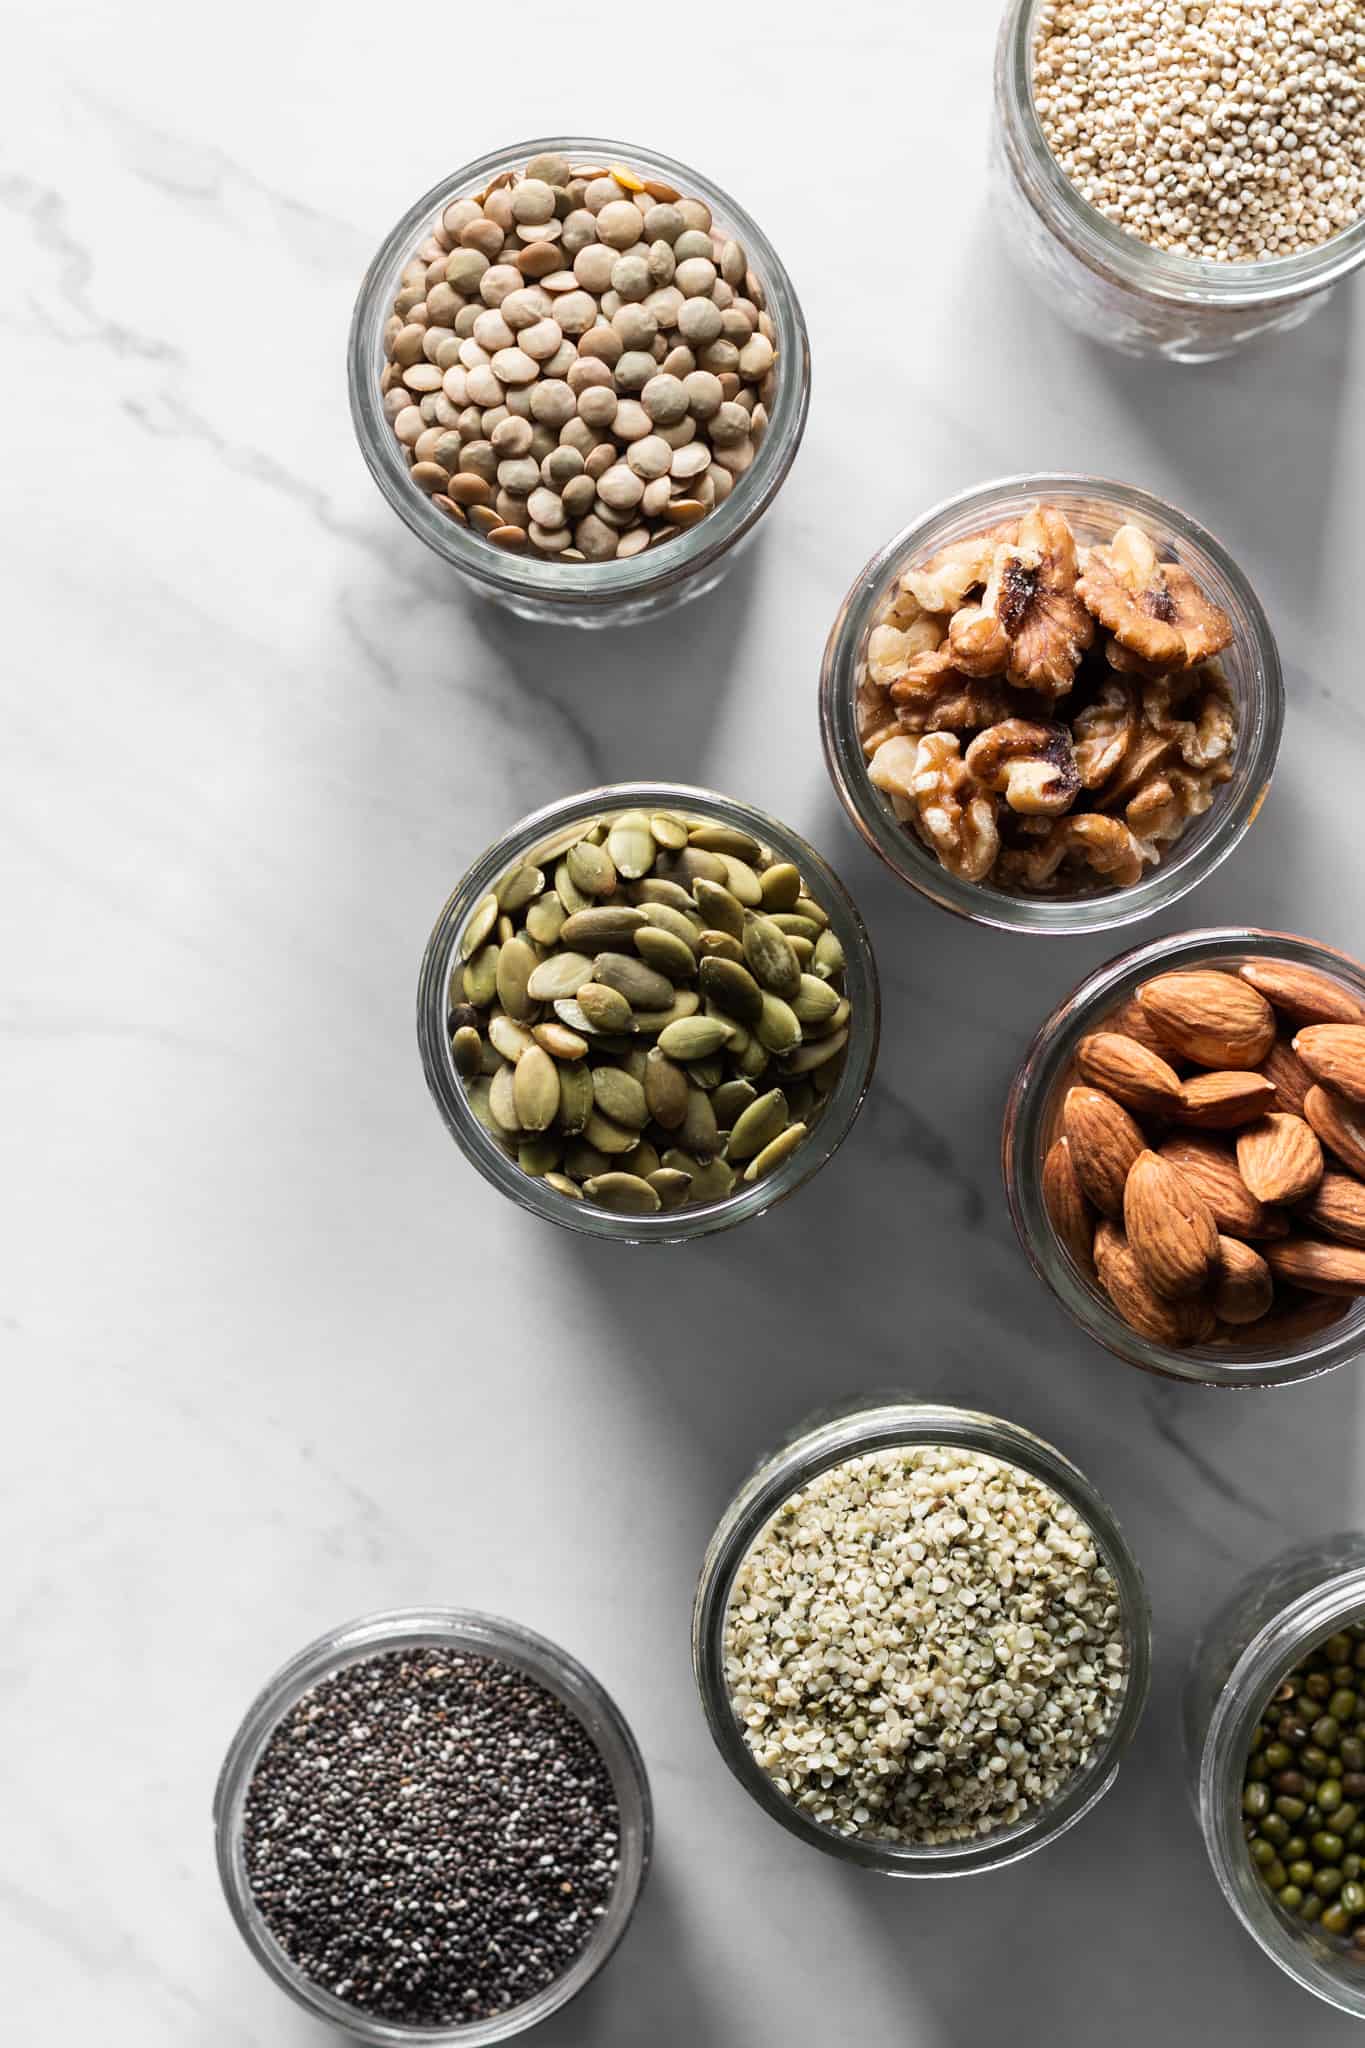 nuts, seeds and legumes in jars from the top